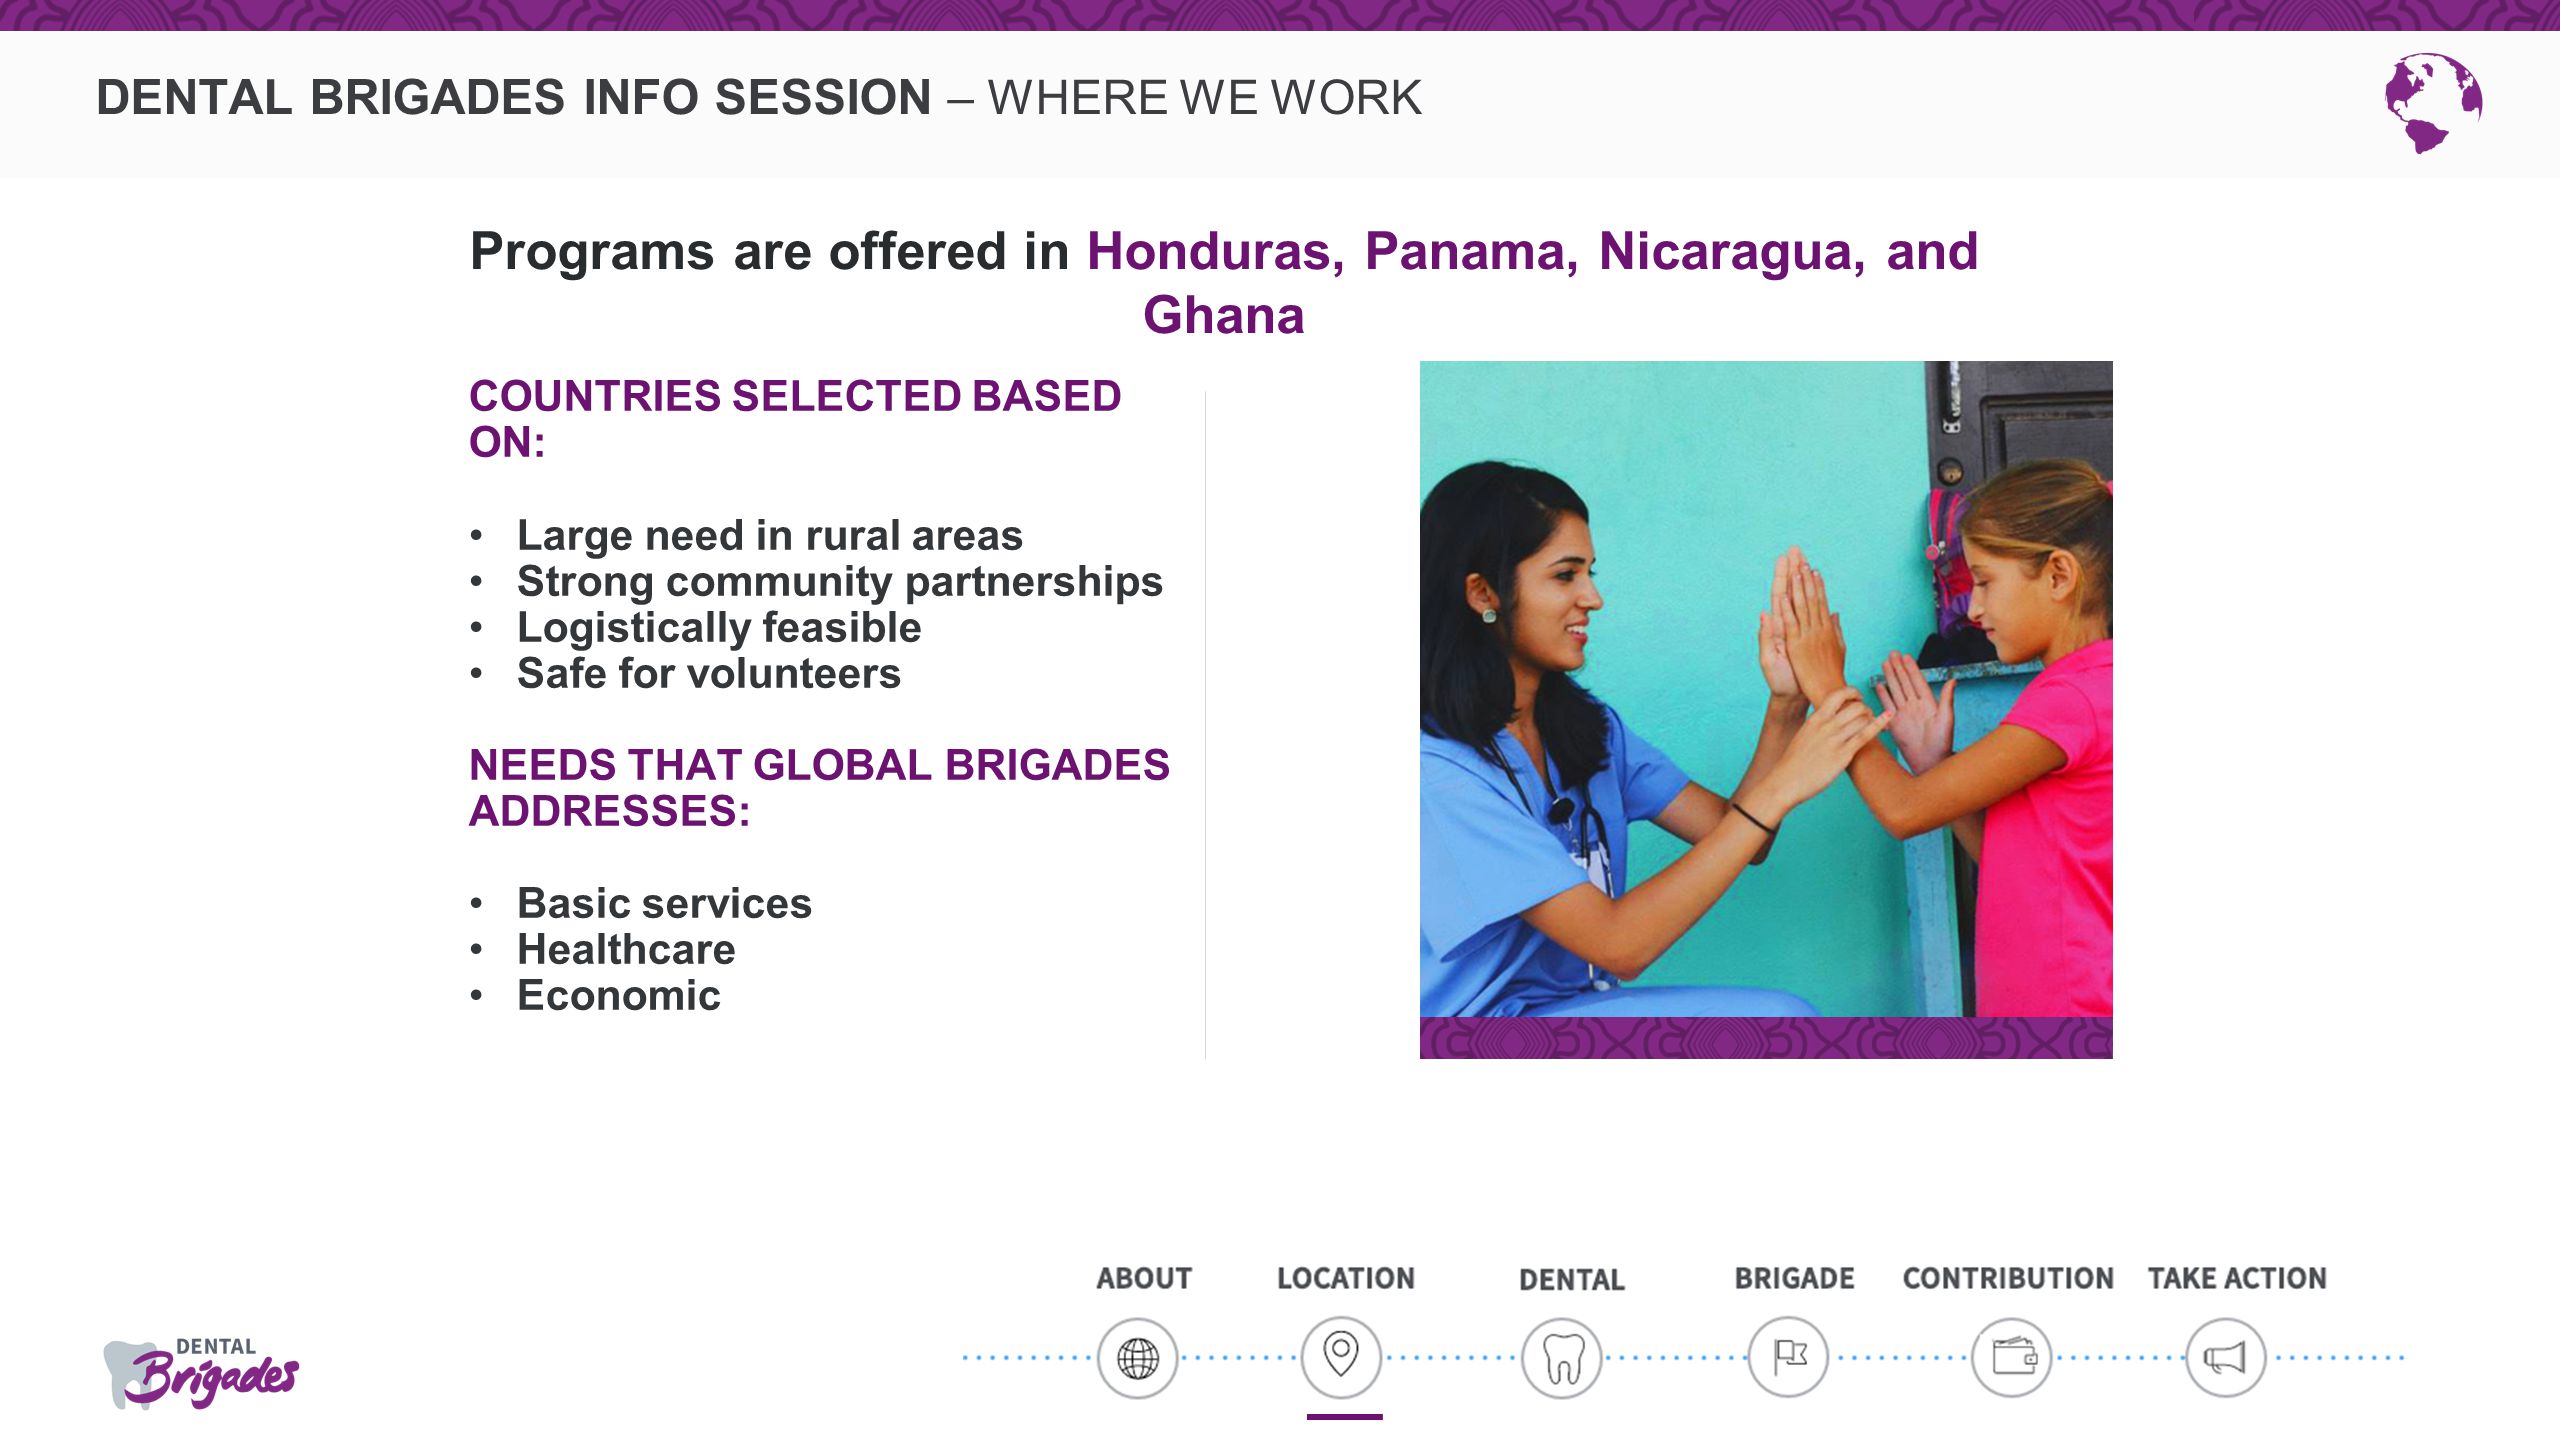 DENTAL BRIGADES INFO SESSION – WHERE WE WORK COUNTRIES SELECTED BASED ON: Large need in rural areas Strong community partnerships Logistically feasible Safe for volunteers NEEDS THAT GLOBAL BRIGADES ADDRESSES: Basic services Healthcare Economic Programs are offered in Honduras, Panama, Nicaragua, and Ghana